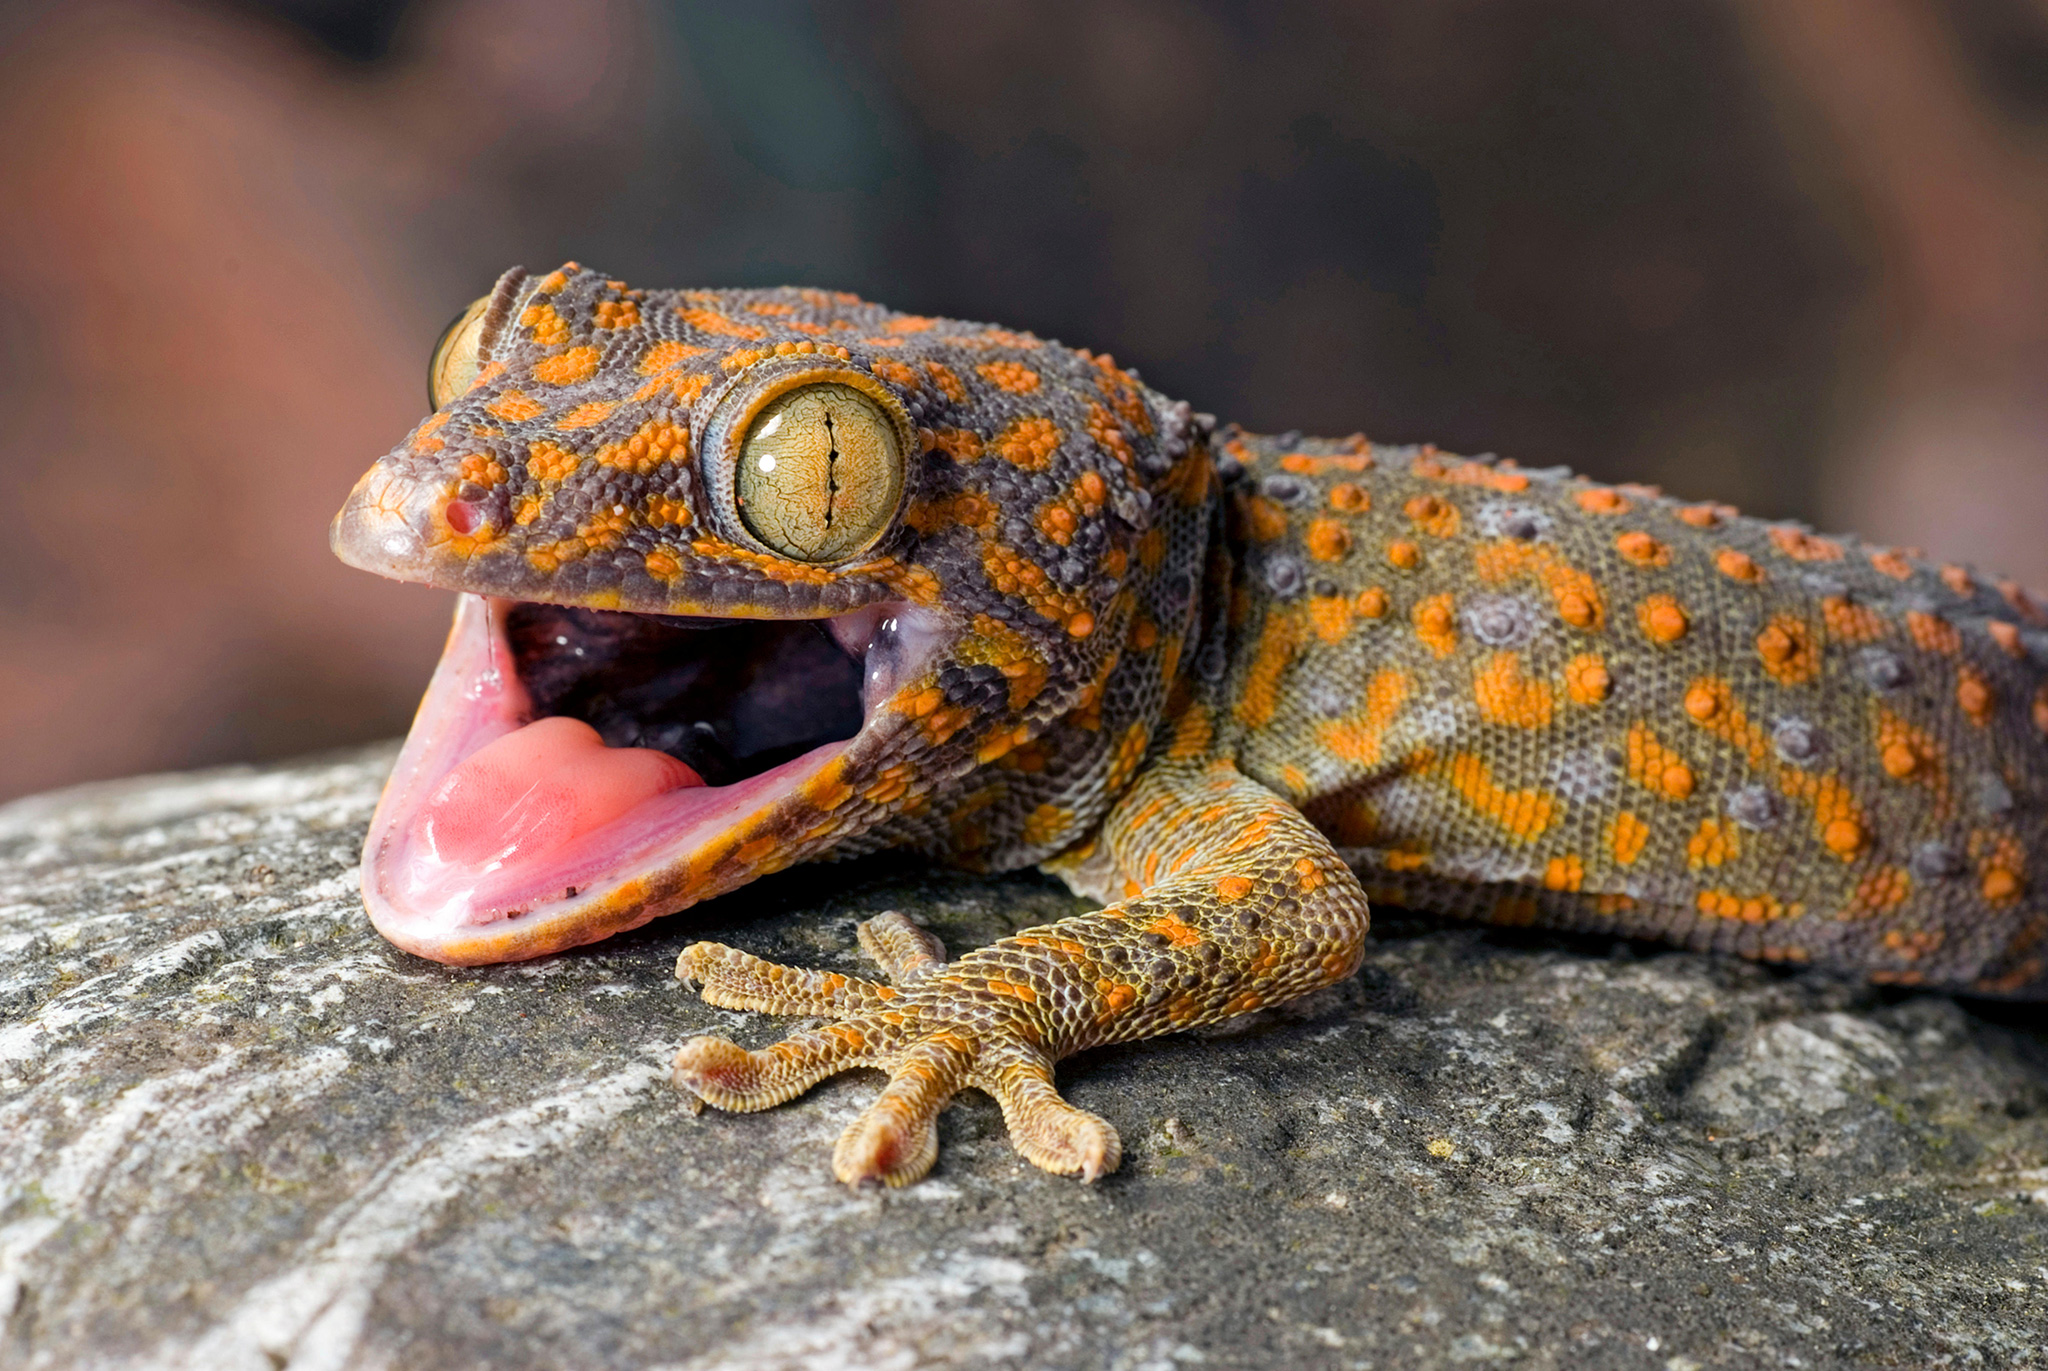 How the International Trade in Geckos Is a Scam